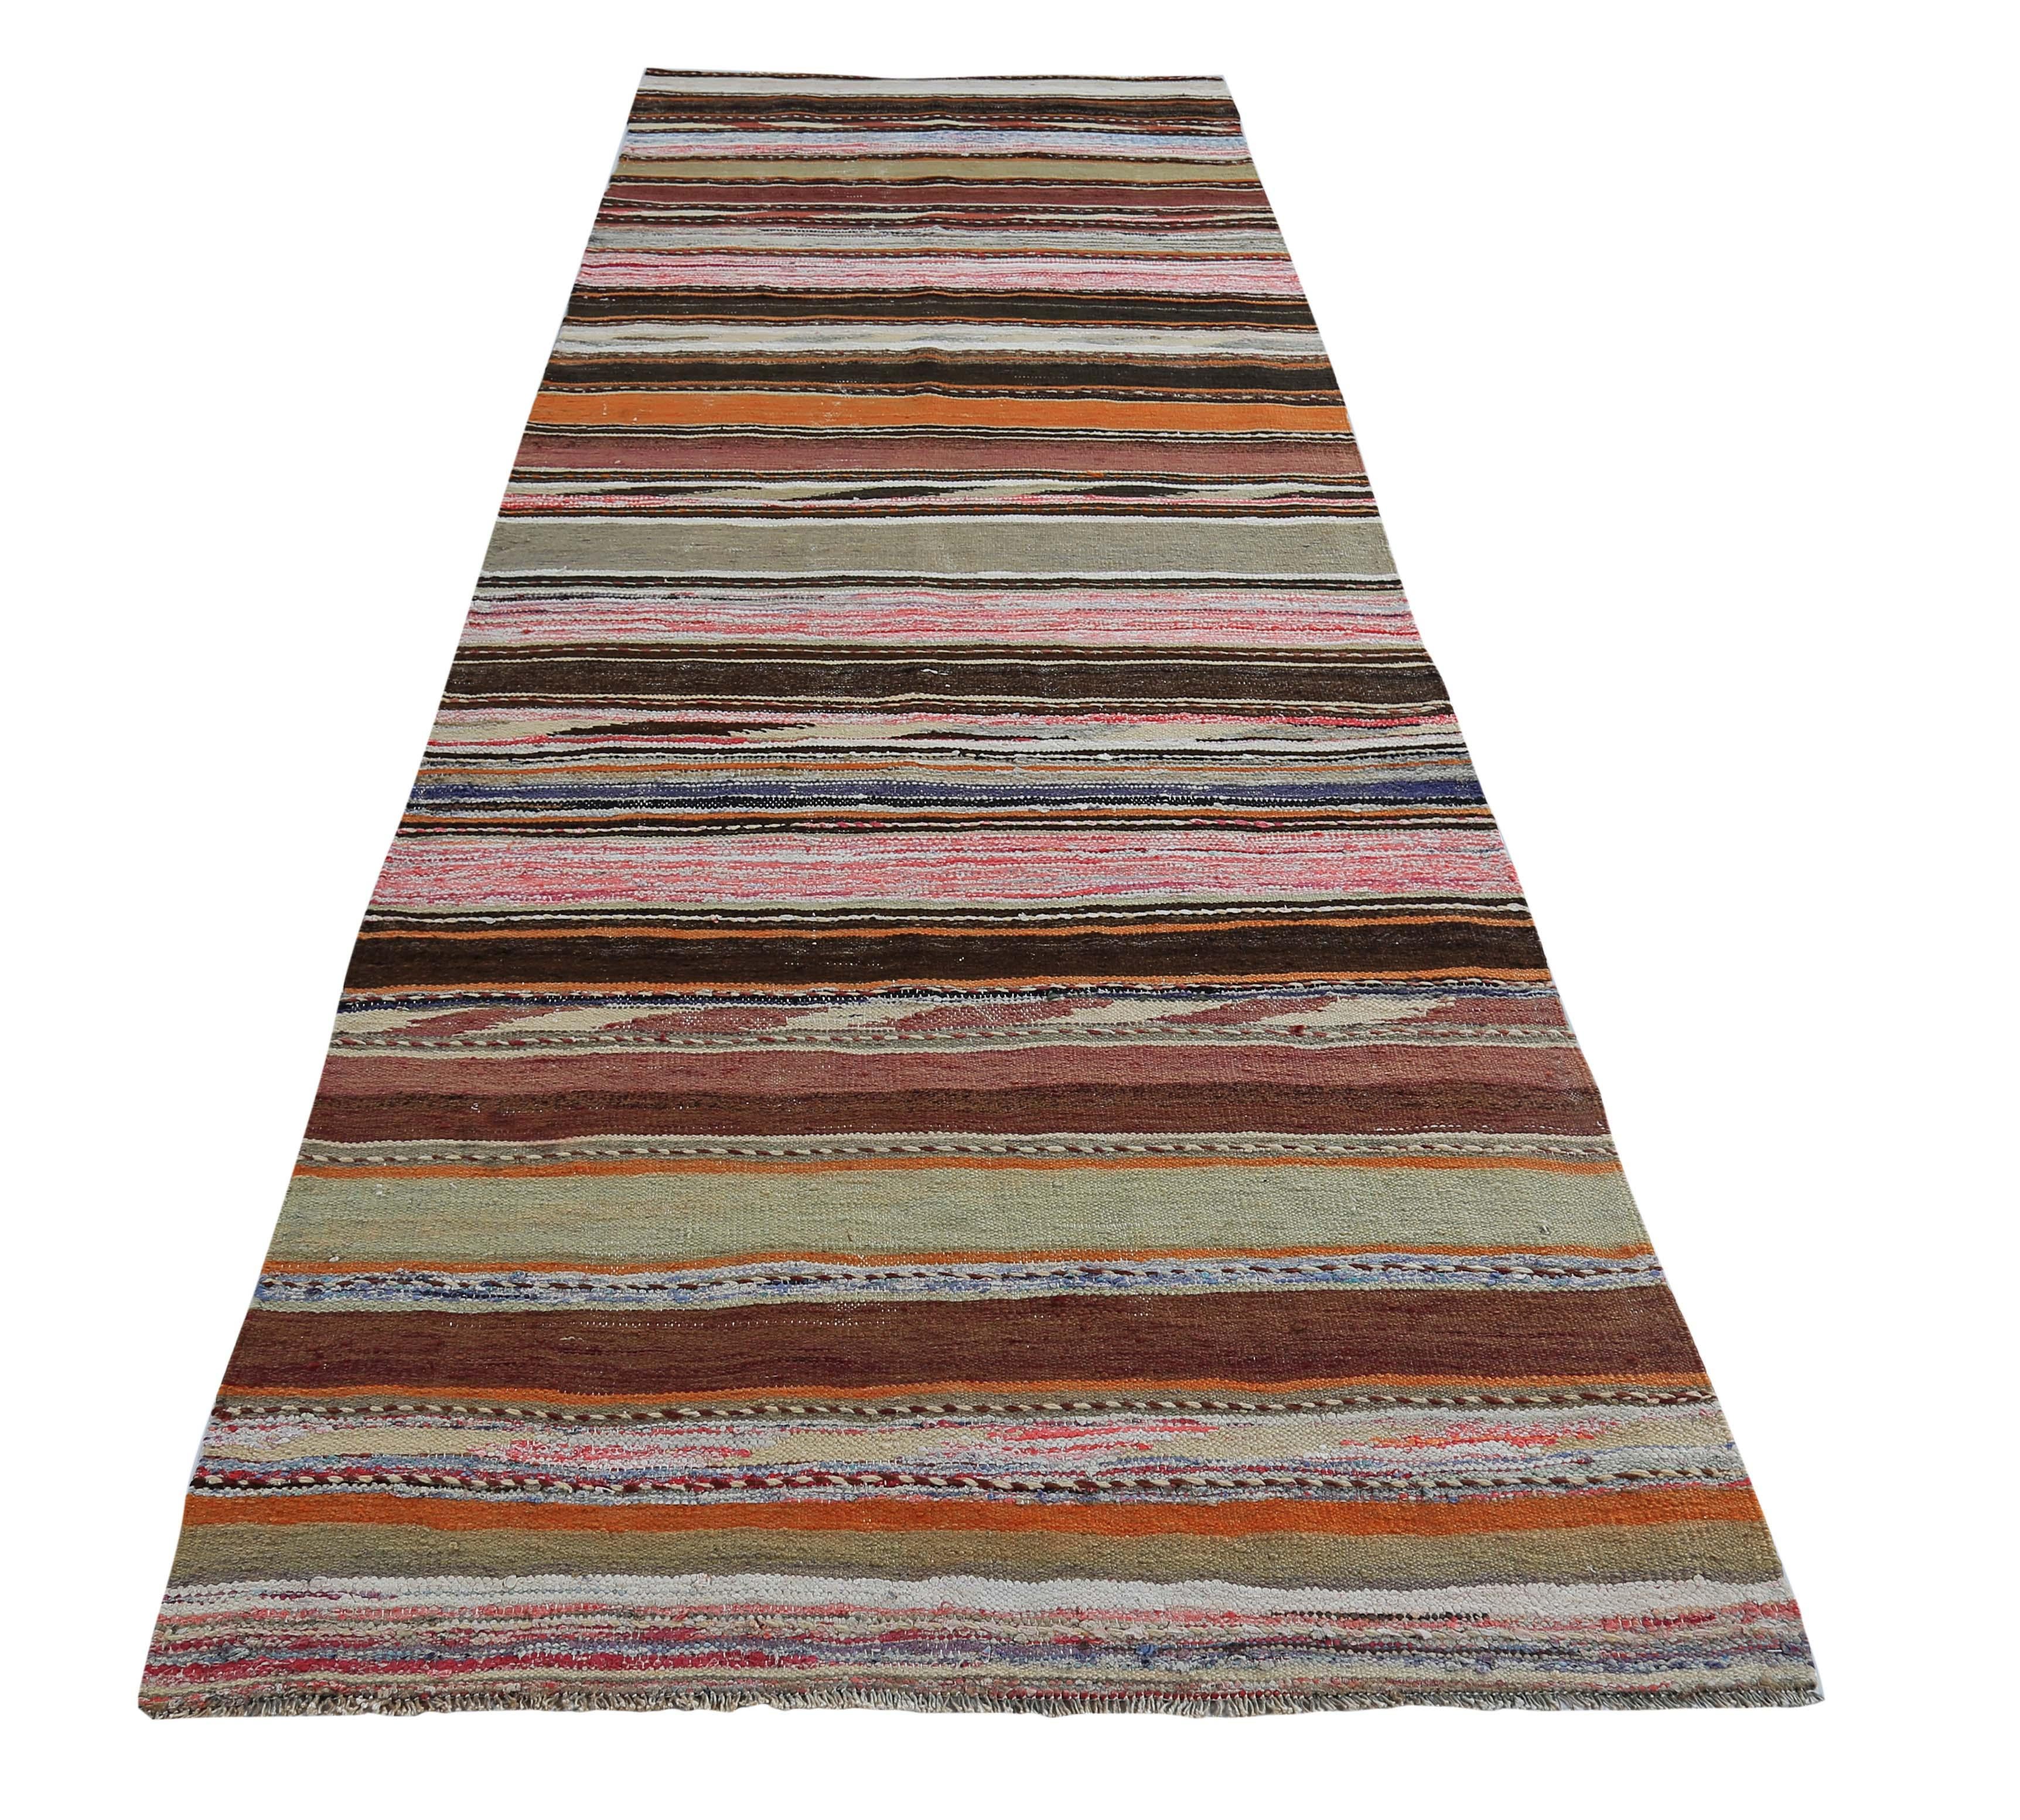 Turkish rug handwoven from the finest sheep’s wool and colored with all-natural vegetable dyes that are safe for humans and pets. It’s a traditional Kilim flat-weave design featuring pink, orange and black stripes. It’s a stunning piece to get for